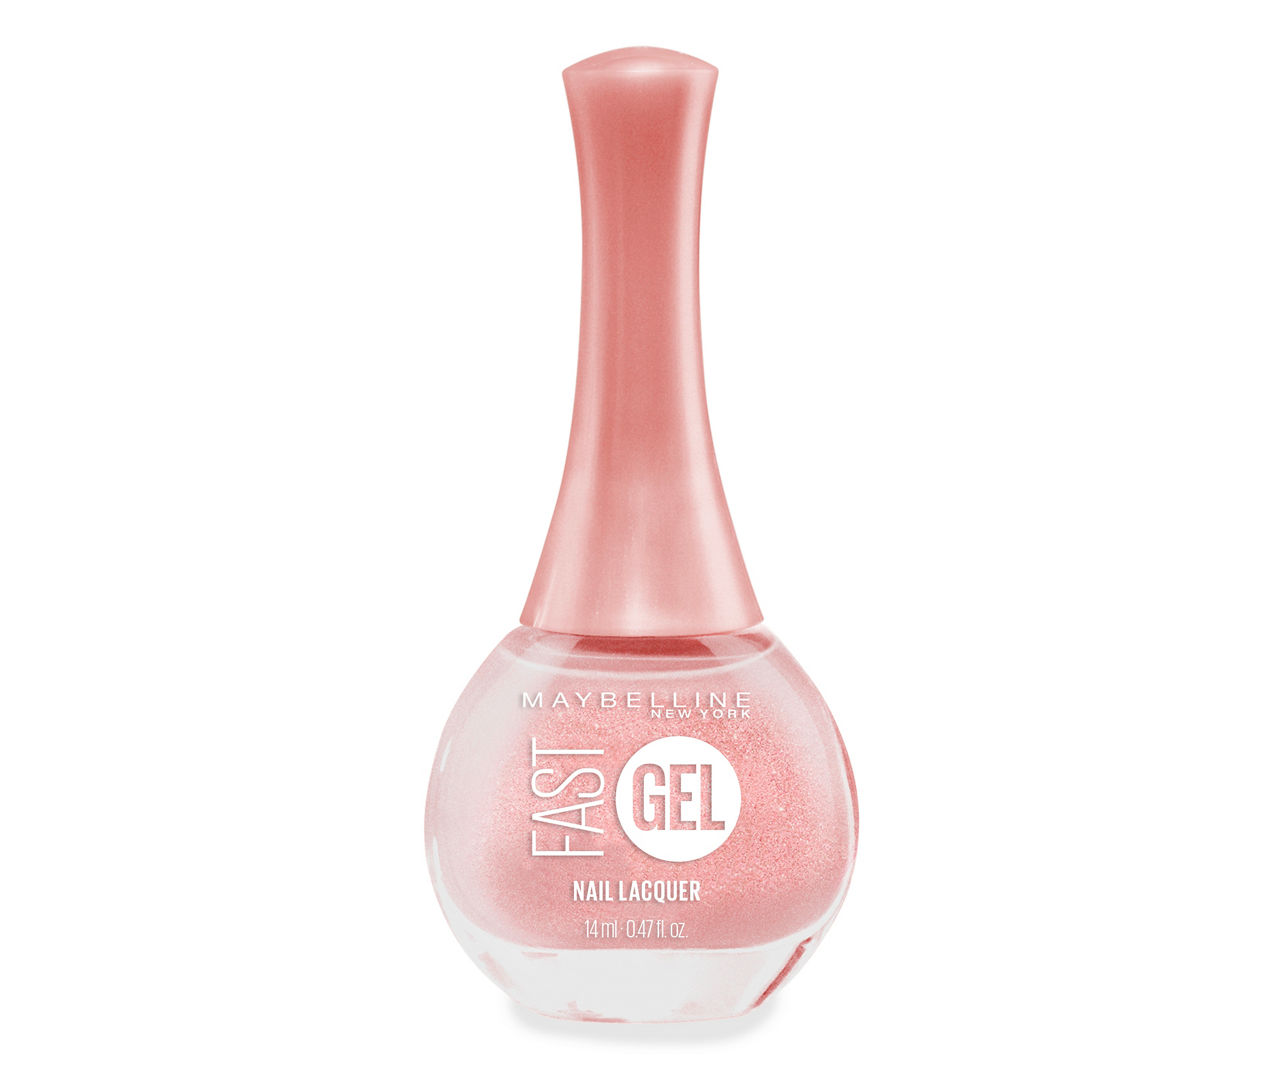 Oz. Nude Gel | Big Nail Flush Maybelline Lots Lacquer, 0.47